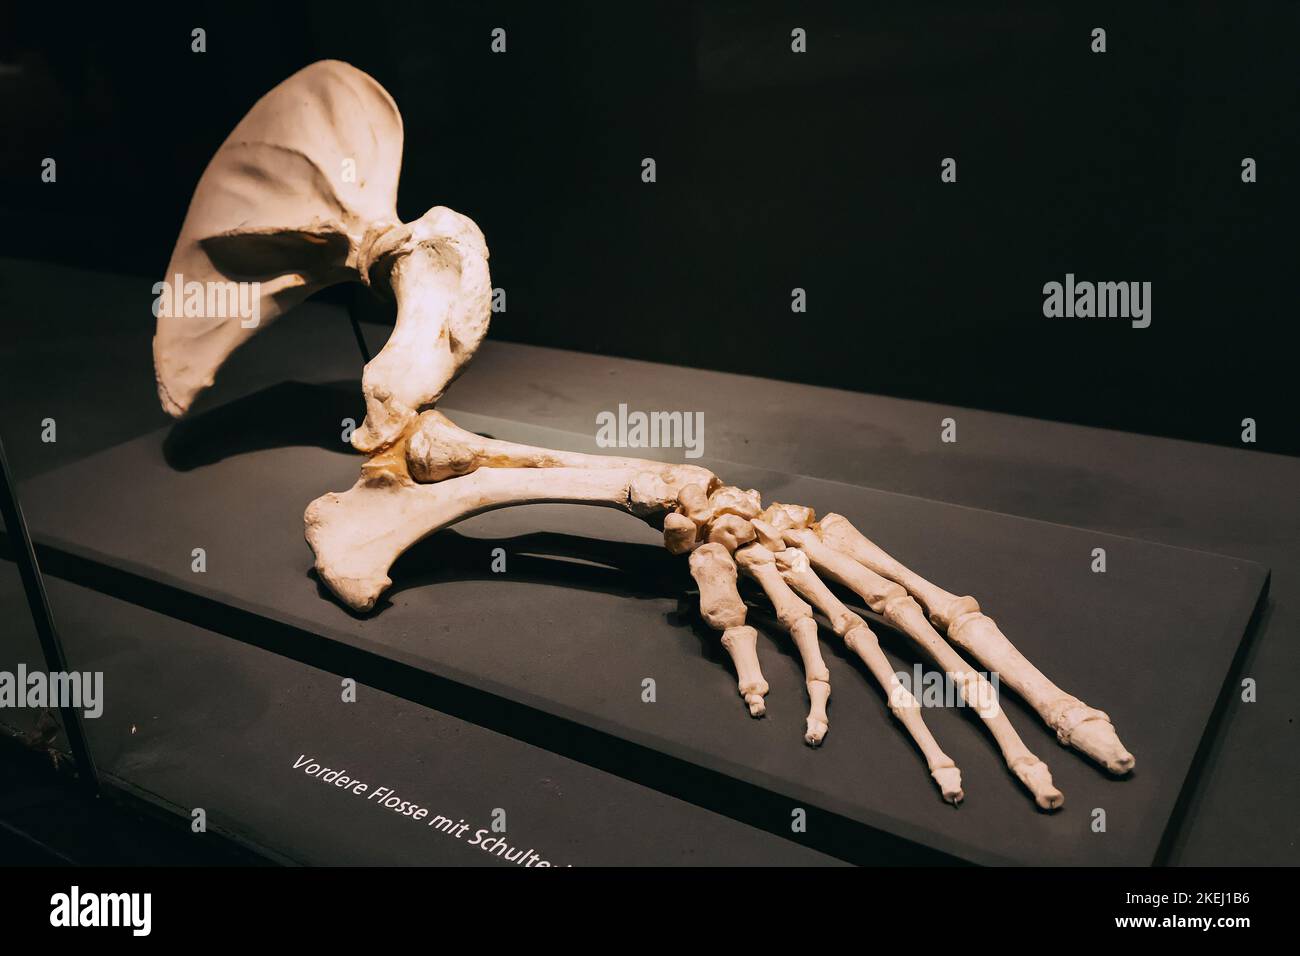 26 July 2022, Munster Natural History Museum, Germany: example of the anatomy of limbs and the bone structure of wings or fin flipper, as an example o Stock Photo